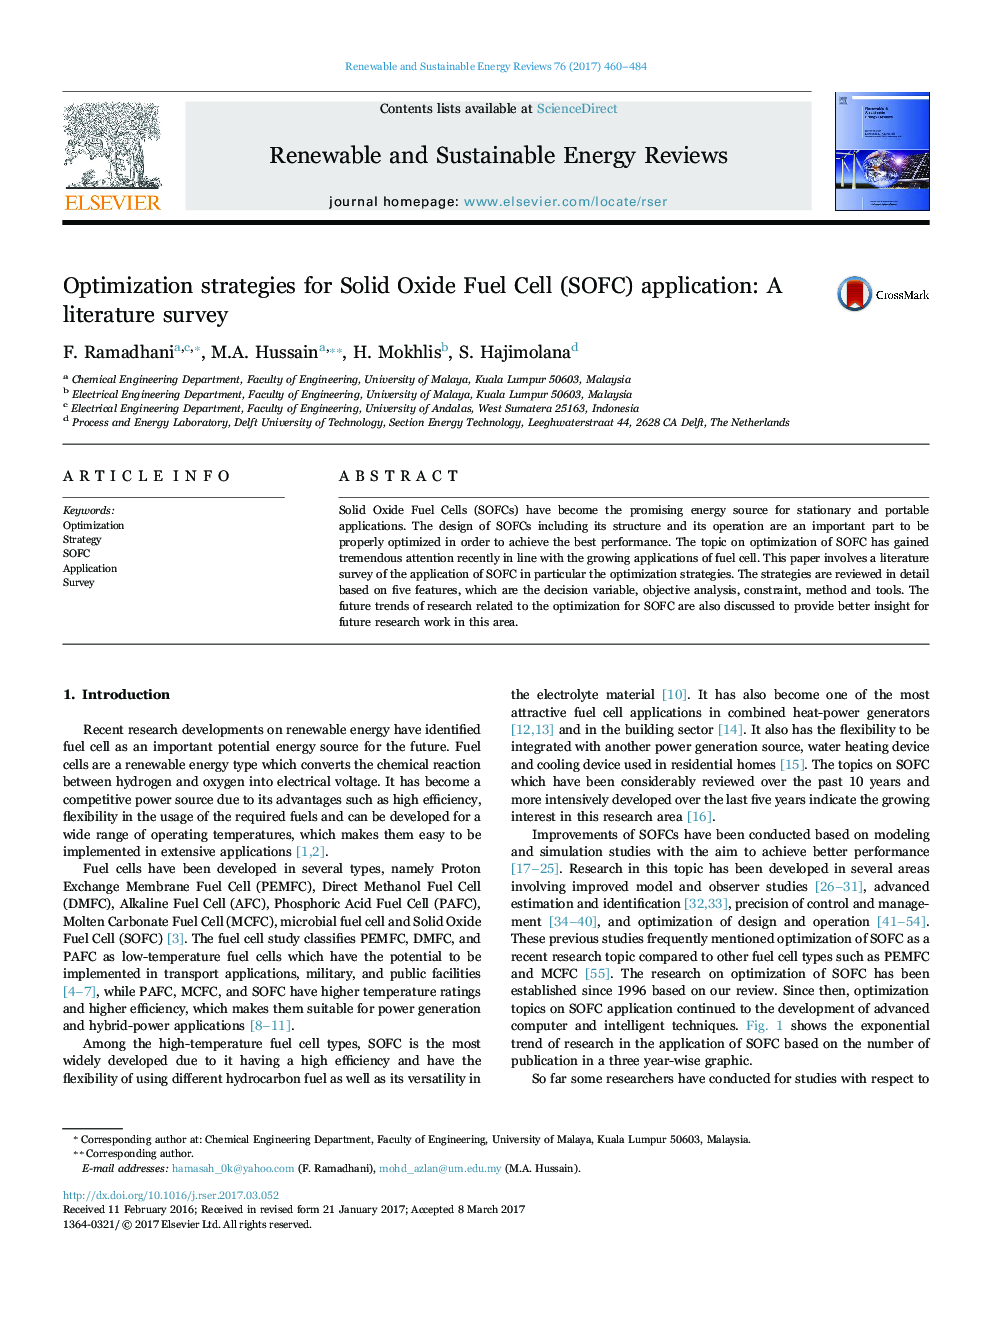 Optimization strategies for Solid Oxide Fuel Cell (SOFC) application: A literature survey